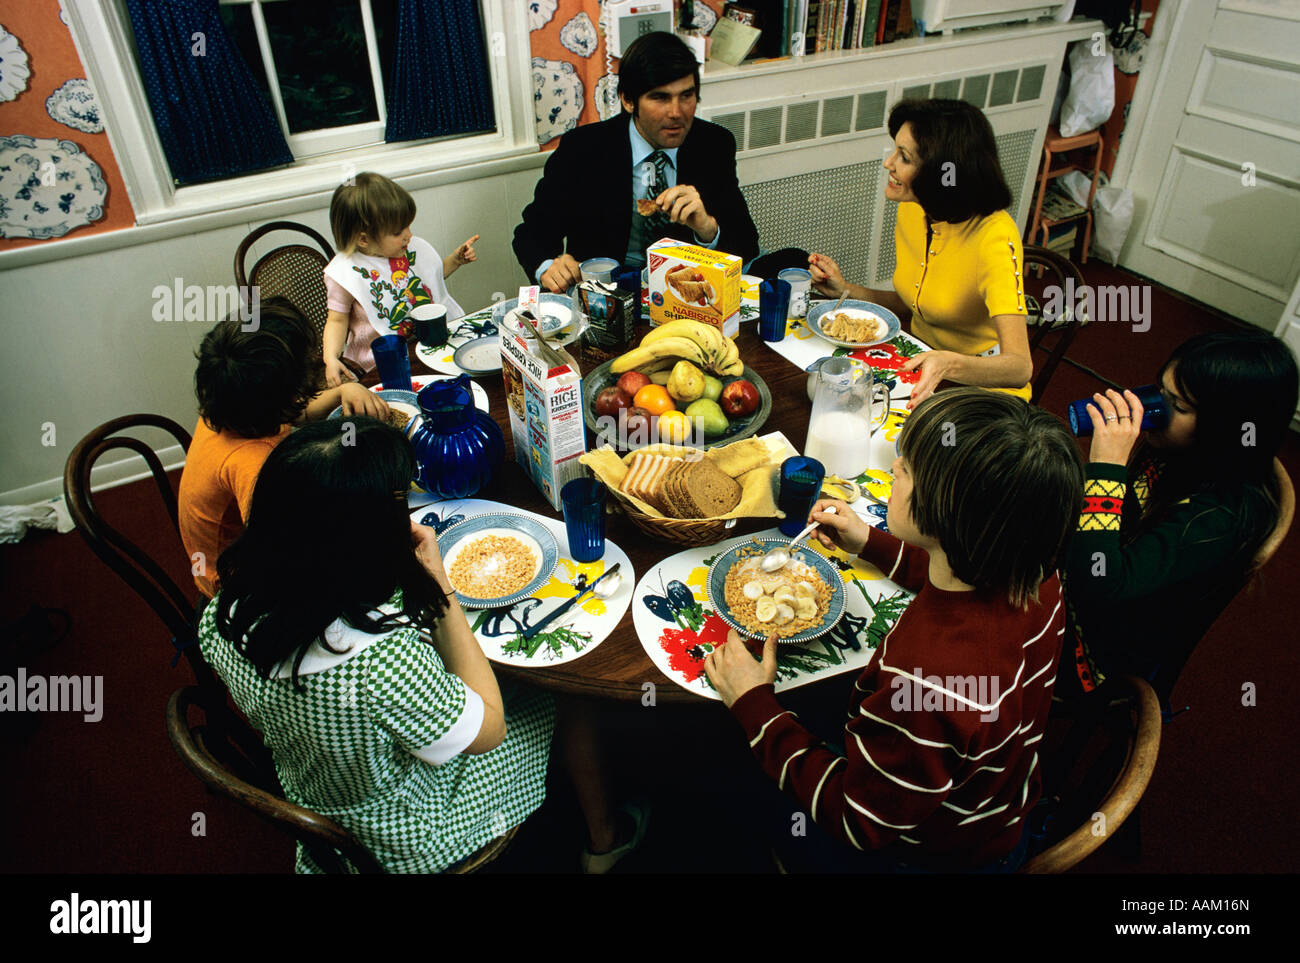 1970s 1980s LARGE FAMILY AROUND BREAKFAST TABLE Stock Photo